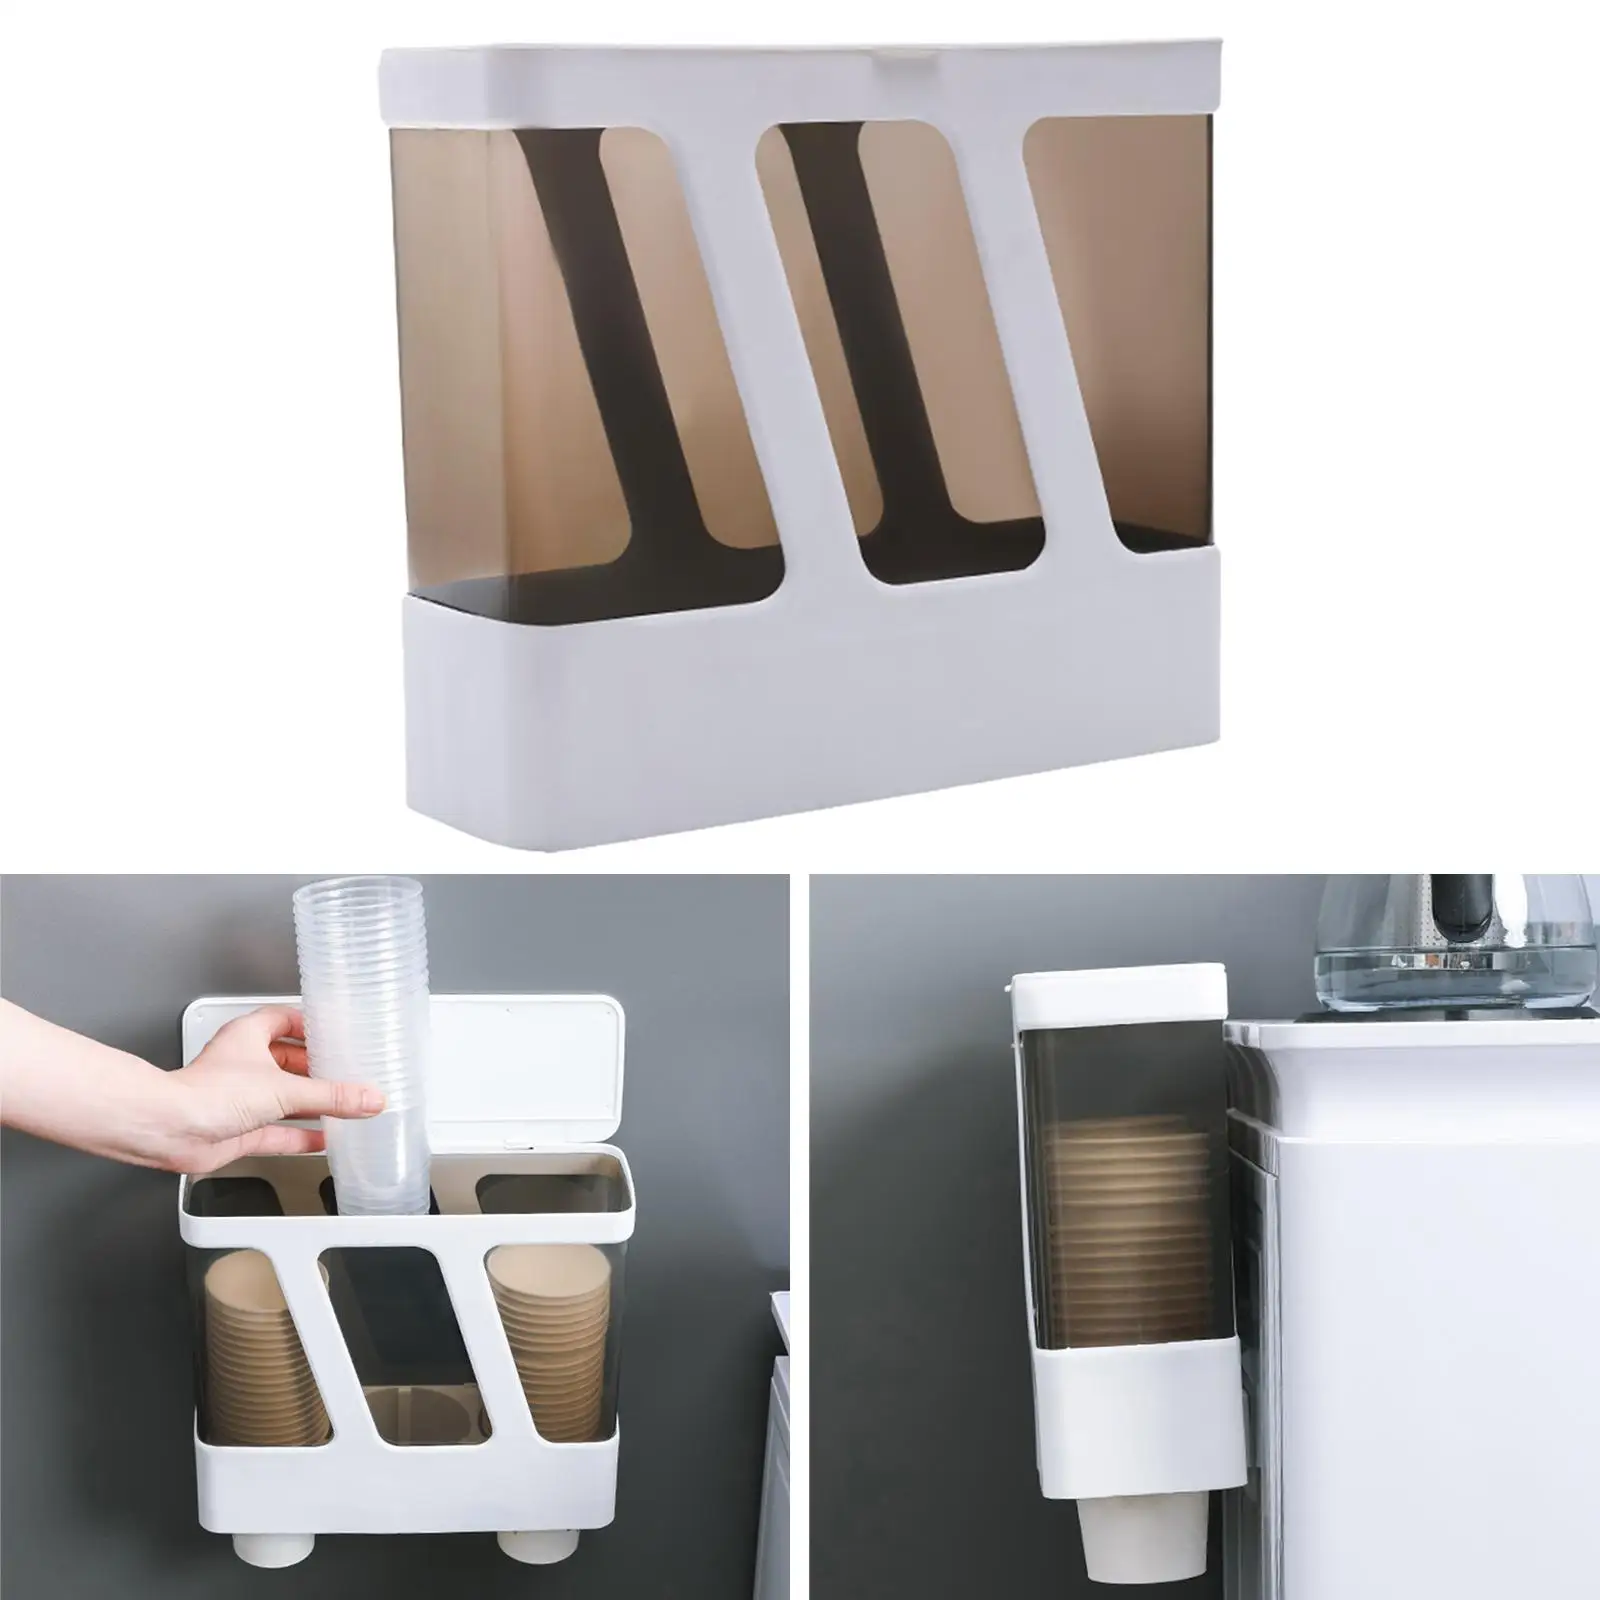 Dustproof Coffee Cup Organizer Countertop Holder 3 Compartments Water Cup Dispenser for Party Cafe Home Restaurant Office